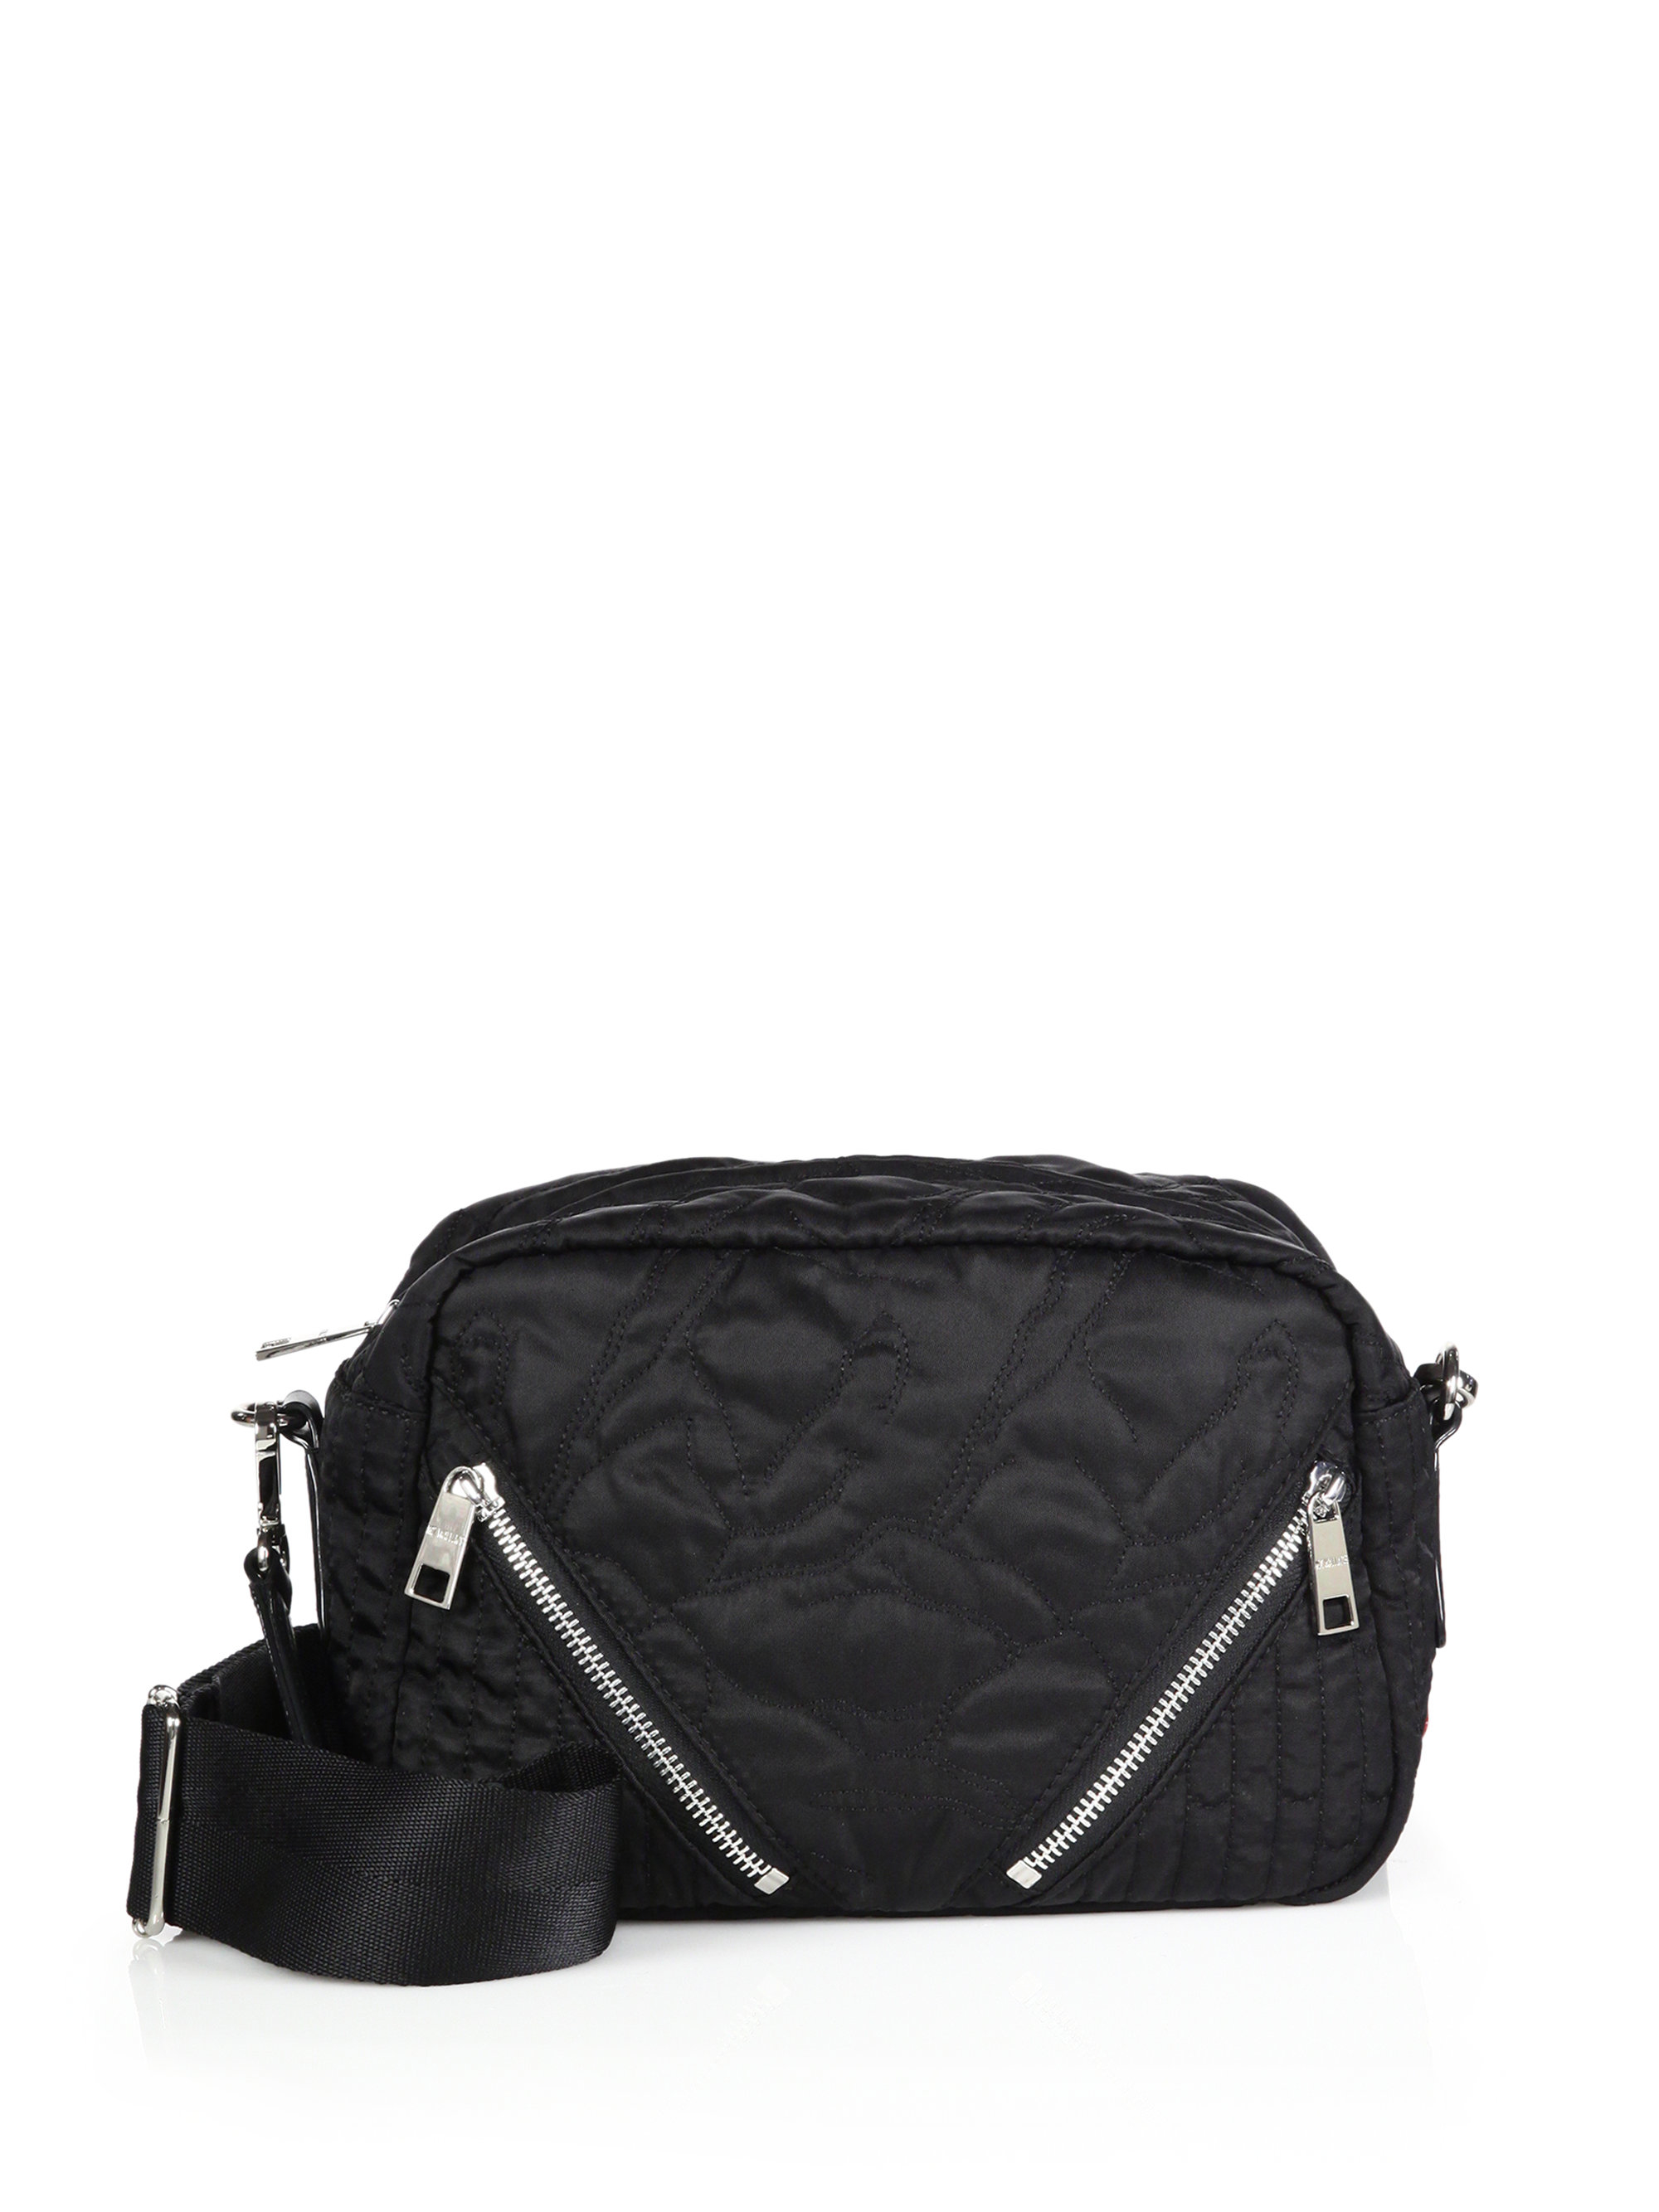 Lyst - Mz Wallace Dee Quilted Nylon Crossbody Bag in Black